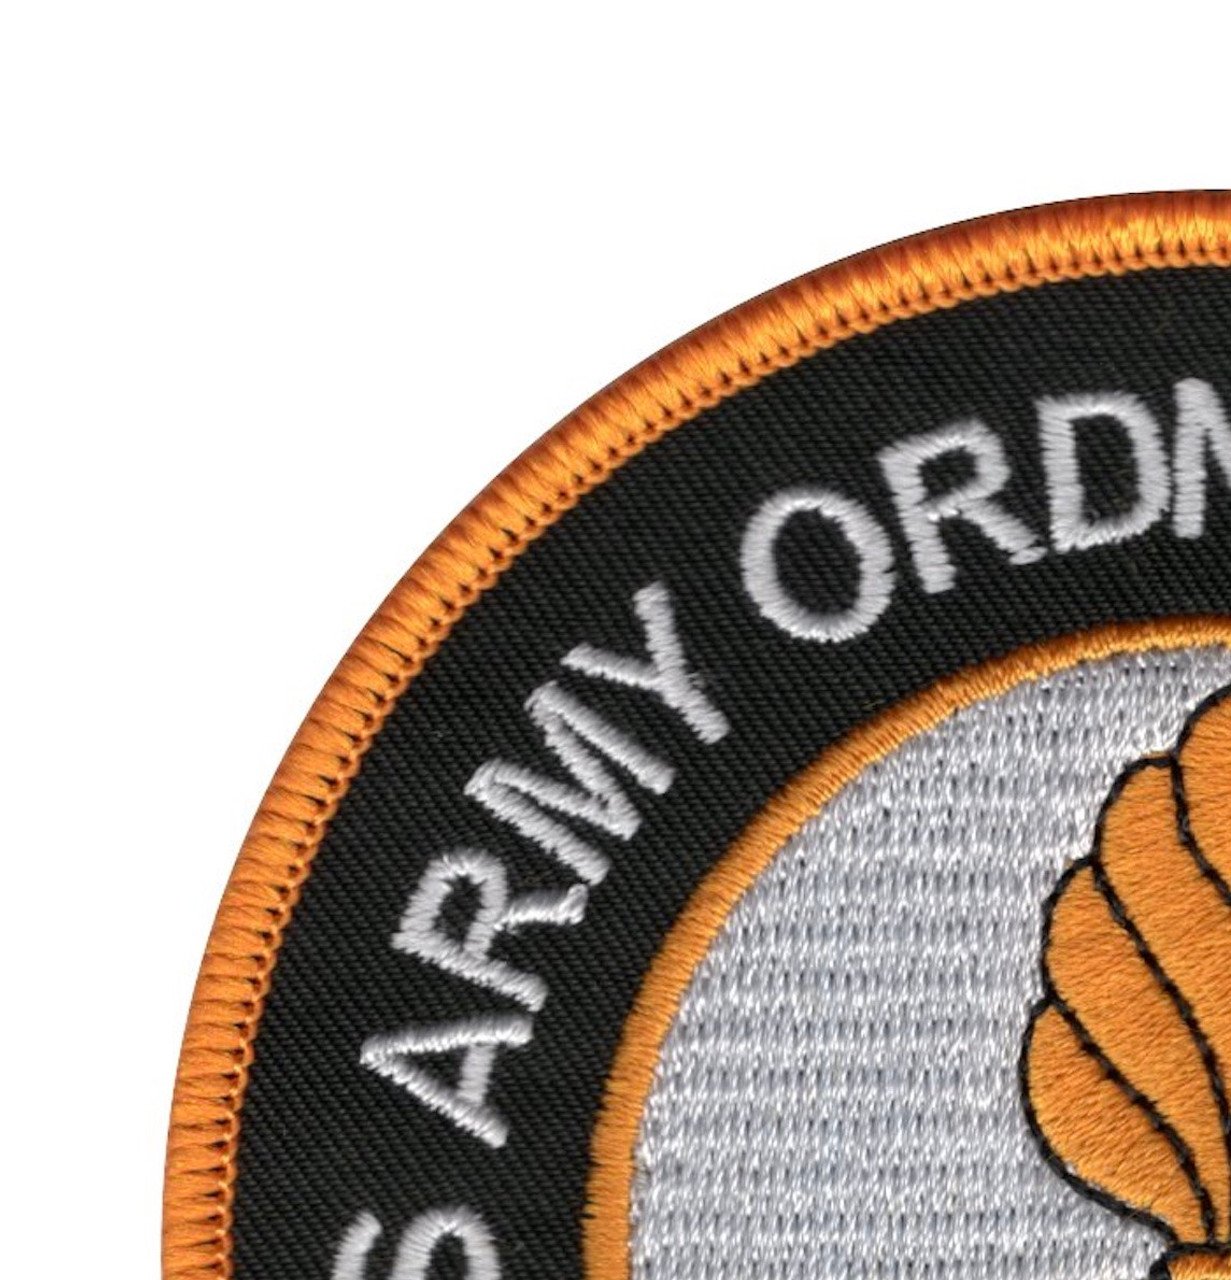 Army Unit Patches Made by Veterans